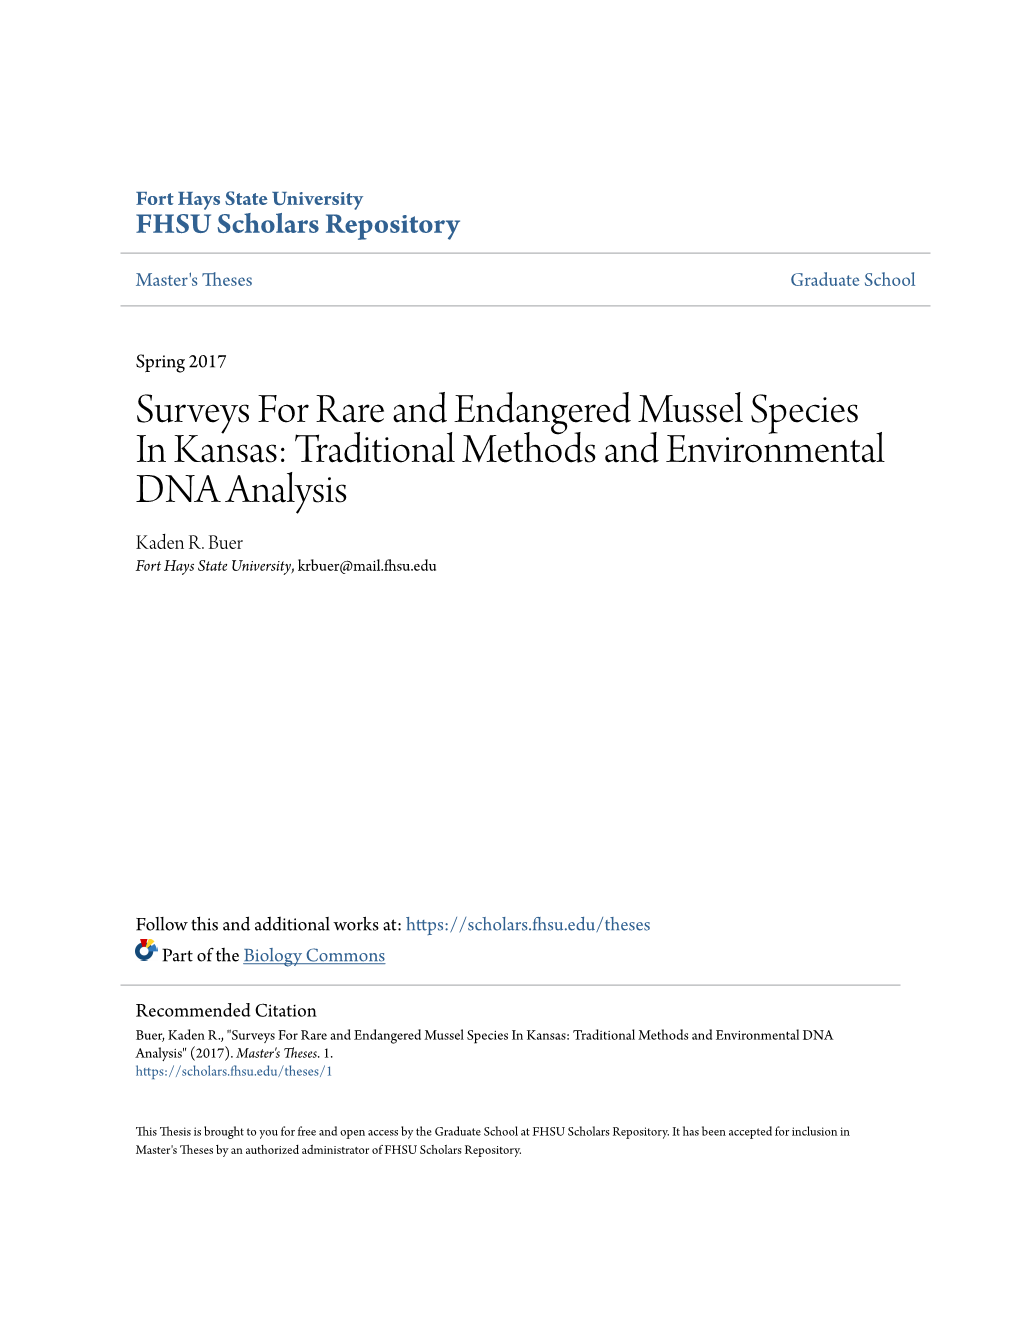 Surveys for Rare and Endangered Mussel Species in Kansas: Traditional Methods and Environmental DNA Analysis Kaden R